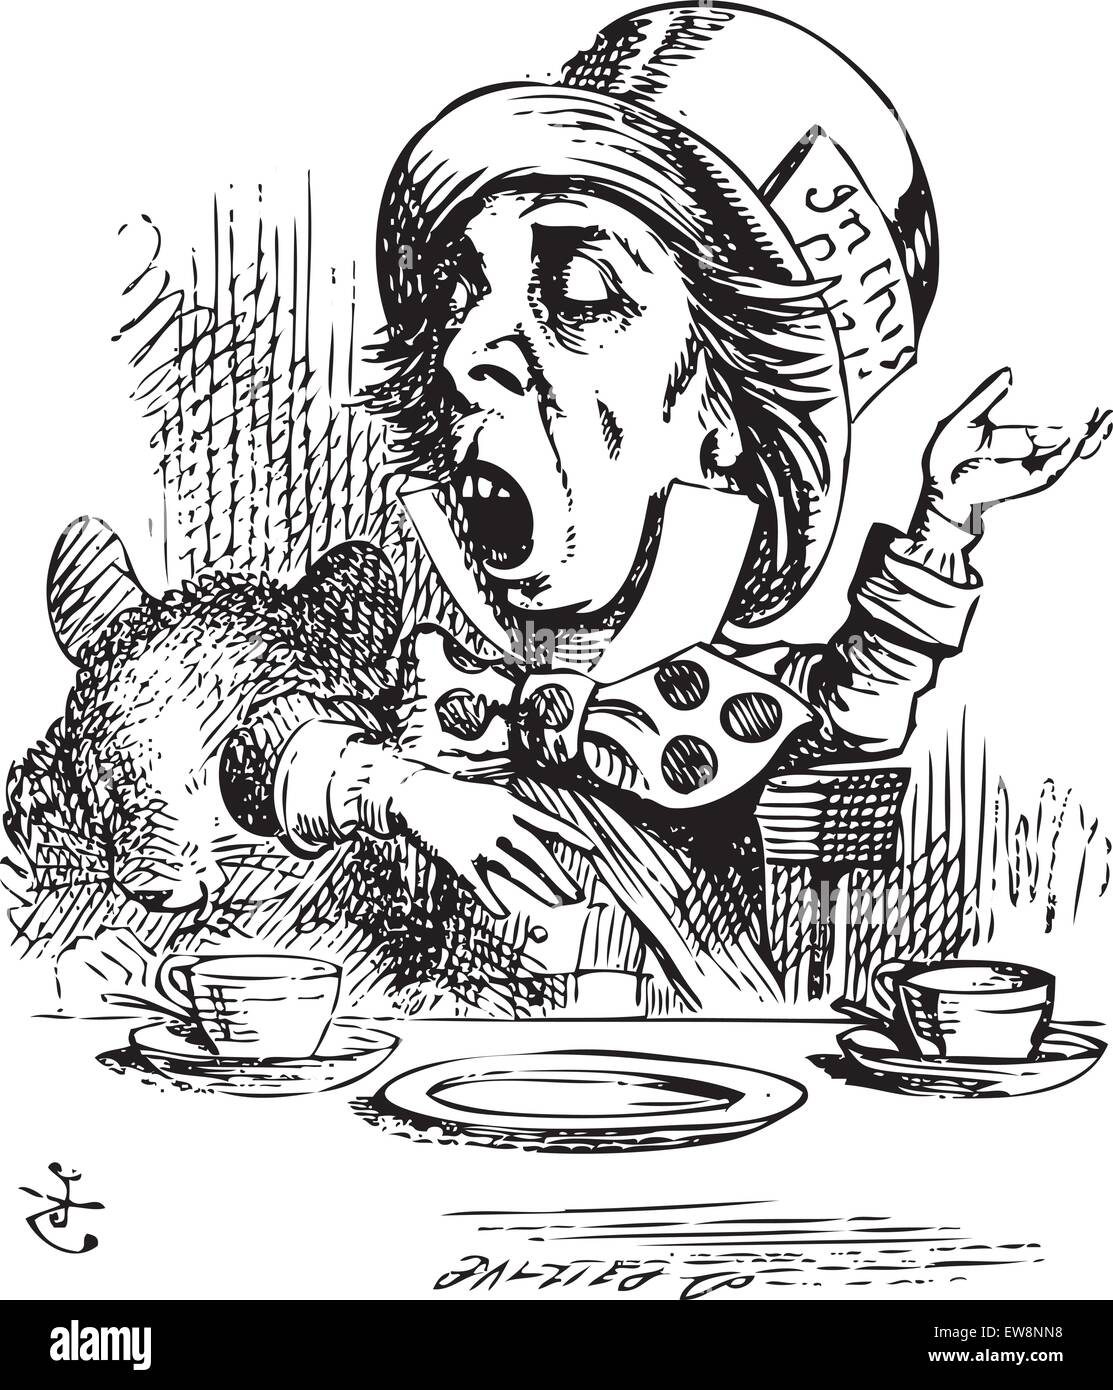 Hatter engaging in rhetoric. Mad Hatter is telling a story to Alice and his friends. Alice in Wonderland original vintage engraving. Alice's Adventures in Wonderland. Illustration from John Tenniel, published in 1865. Stock Vector